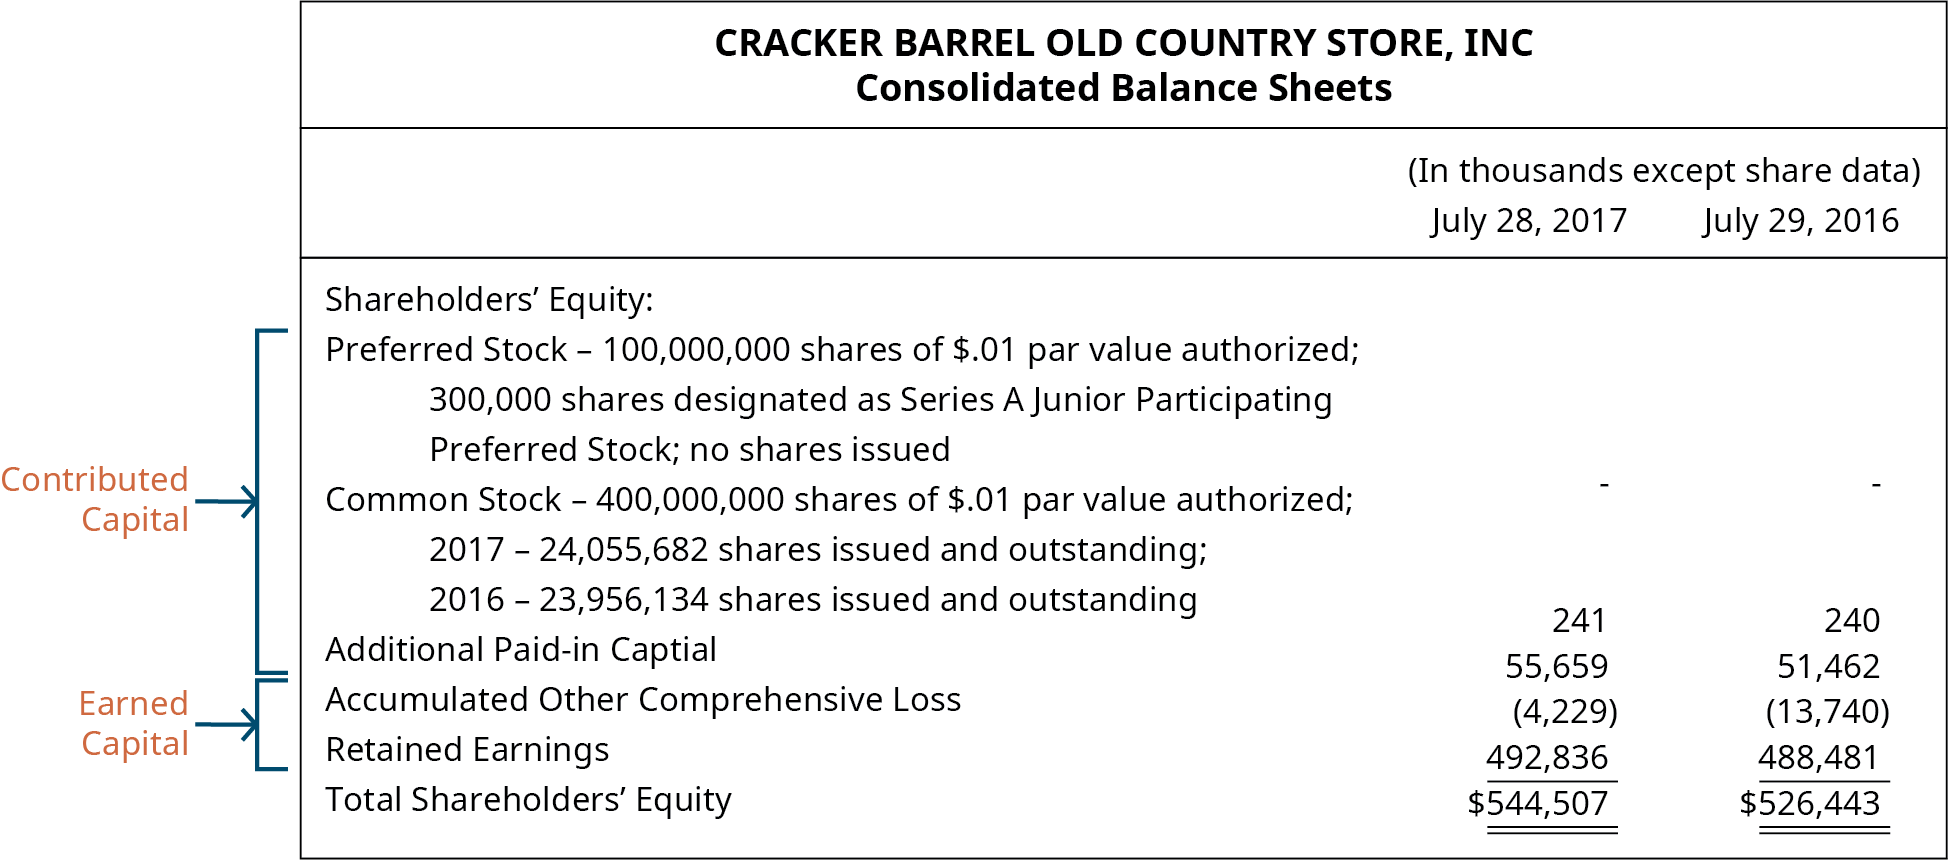 Cracker Barrel Old Country Store, Inc, Consolidated Balance Sheets. (In thousands except share data) July 28, 2017 and July 29, 2016, respectively: Shareholders’ Equity: Preferred Stock – 100,000,000 shares of $.01 par value authorized; 300,000 shares designated as Series A Junior Participating Preferred Stock; no shares issued. Common stock – 400,000,000 shares of $.01 par value authorized; 2017 – 24,055,682 shares issued and outstanding; 2016 – 23,956,134 shares issued and outstanding 241, 240. Additional paid-in capital 55,659, 51,462. Accumulated other comprehensive loss (4,220), (13,740). Retained earnings 492,836, 488,481. Total shareholders’ equity 544,507, 526,443. A bracket around the Preferred stock, Common stock, and Additional paid-in capital indicates that they make up the contributed capital. A bracket around the Accumulated other comprehensive loss and the Retained earnings indicates that they make up the earned capital.